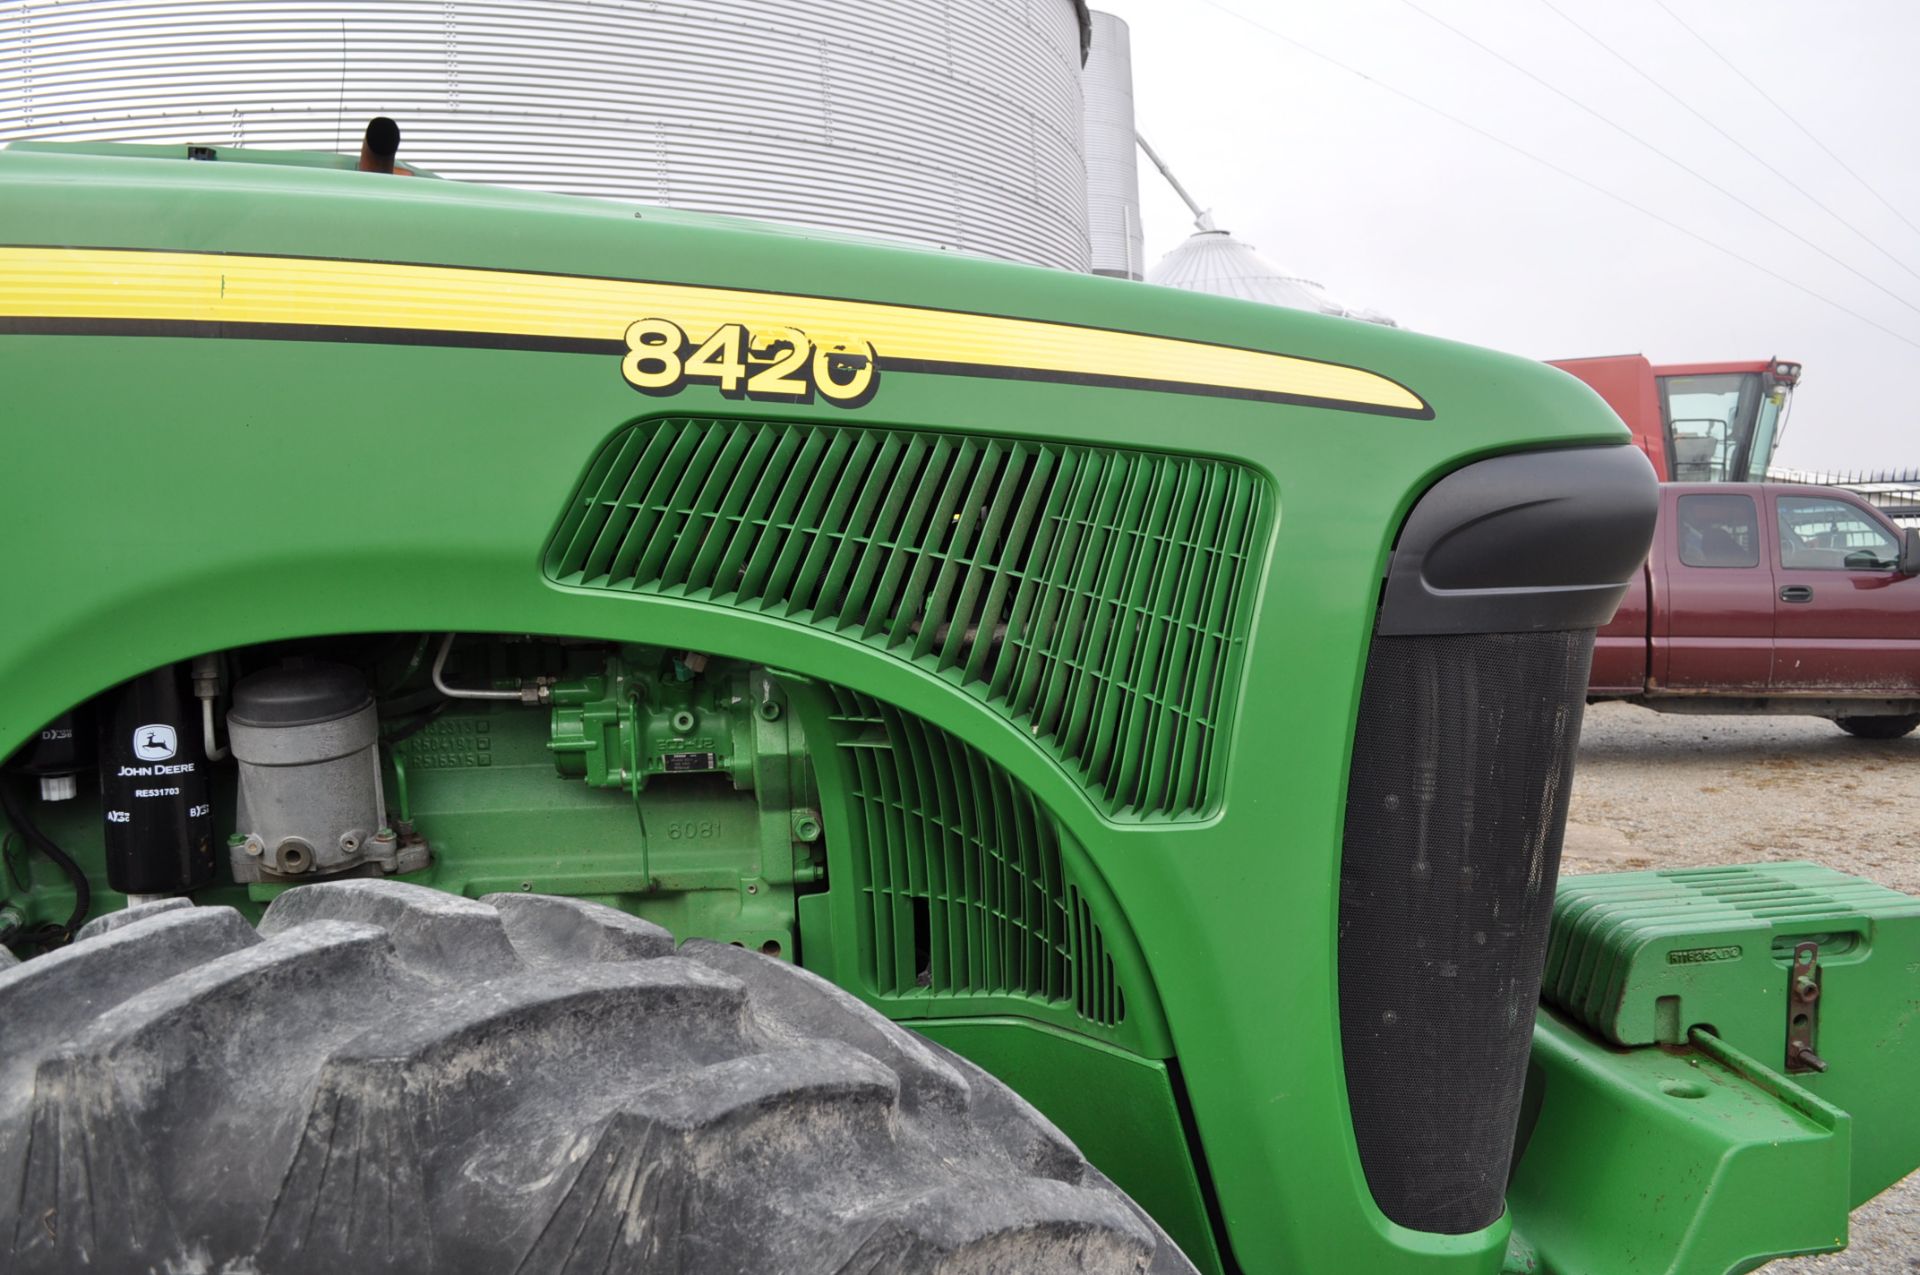 2005 John Deere 8420 MFWD Tractor, 480/80 R 46 duals, 380/85 R 34 front duals, ILS, power shift, - Image 11 of 25